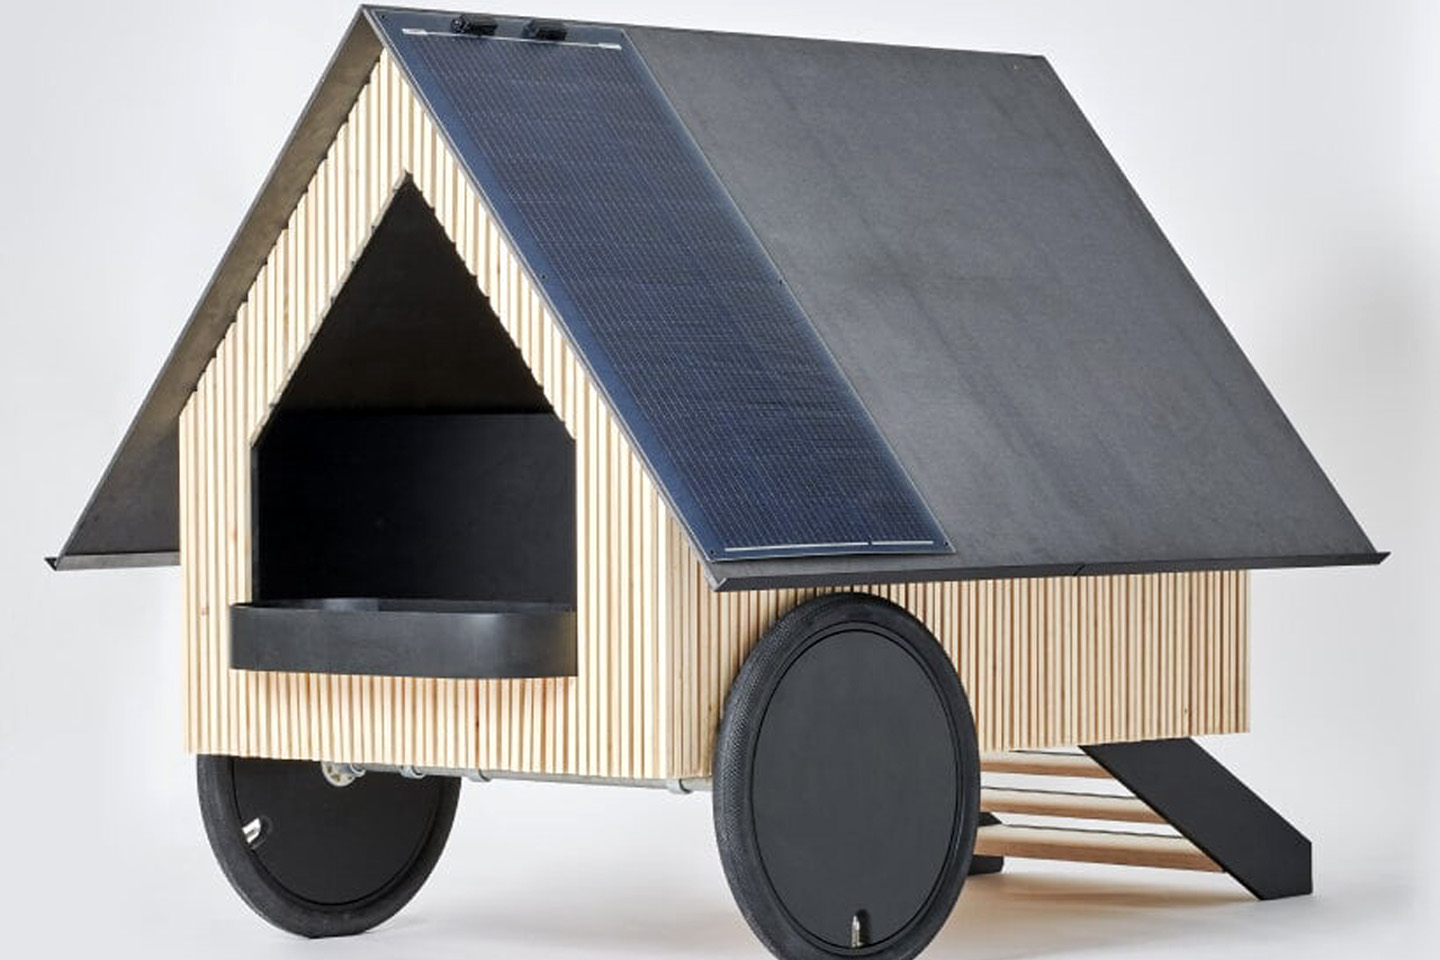 #Wooden hut on wheels is the ultimate dog house to help doggos live a nomadic life on the go